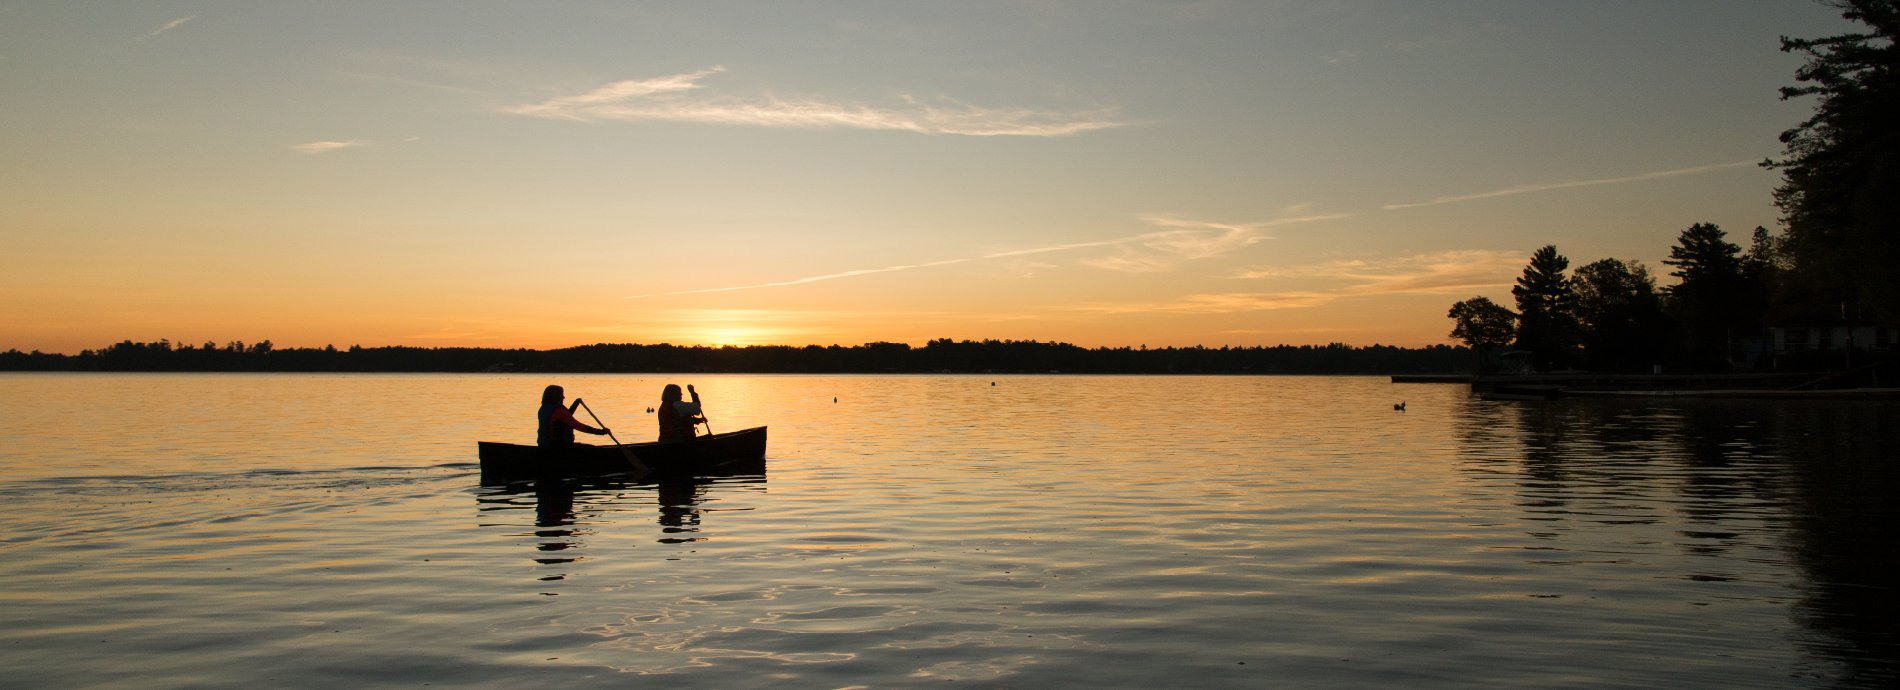 paddling in a canoe at sunset